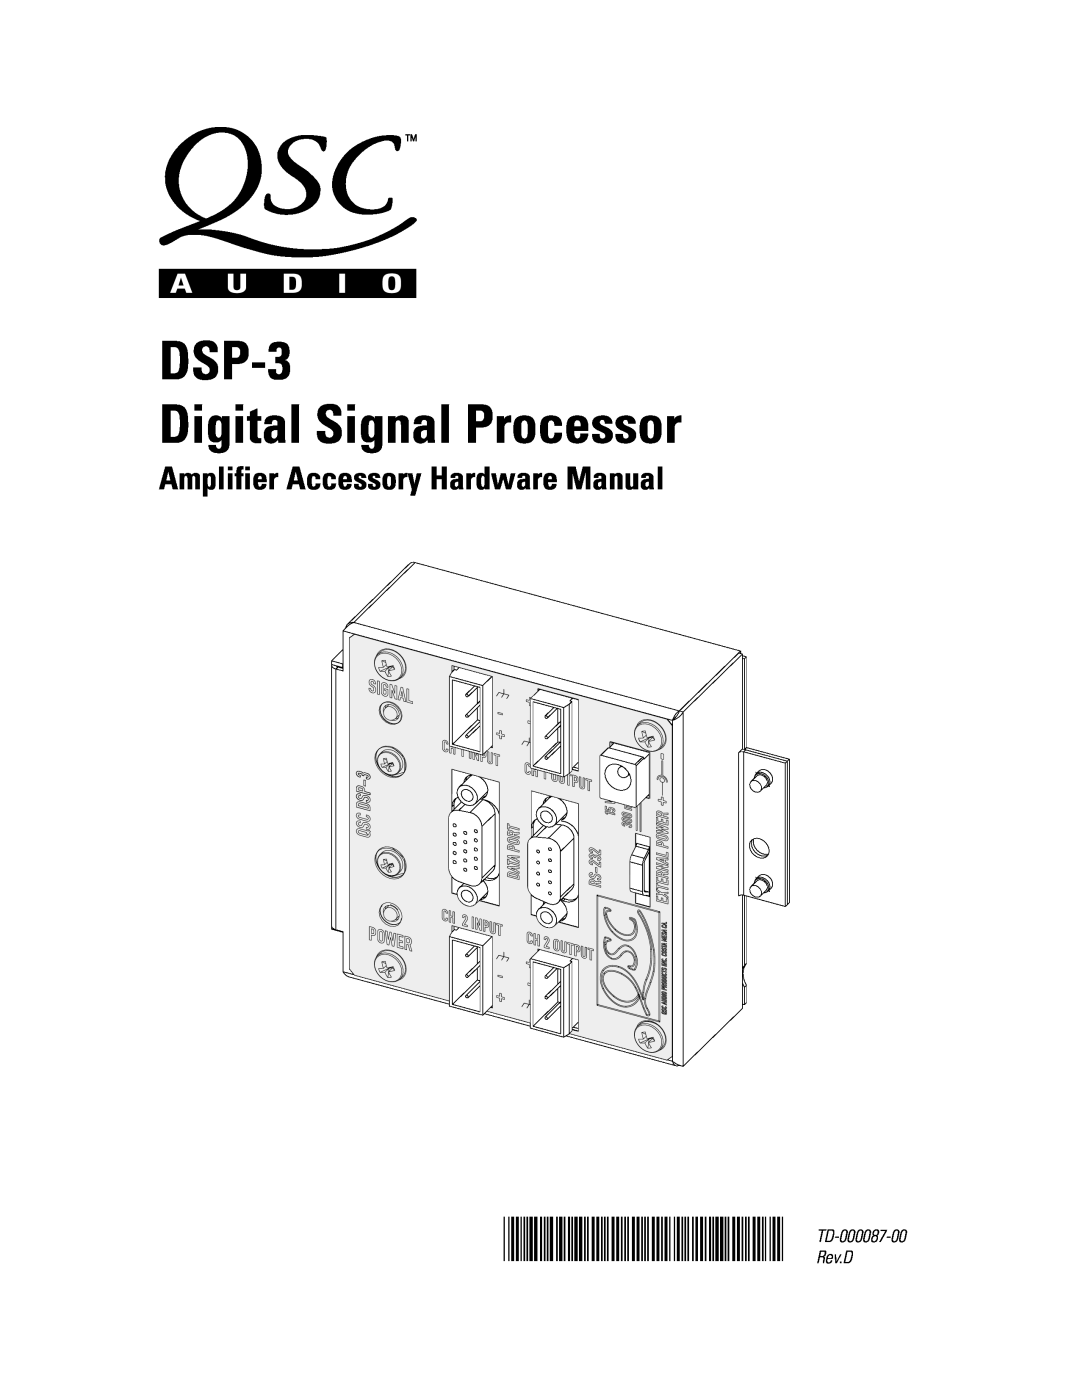 QSC Audio DSP-3 manual A D V A N C E D S Y S T E M S P R O D U C T S, Optimize Your Sound With DSP From QSC, Powerful 